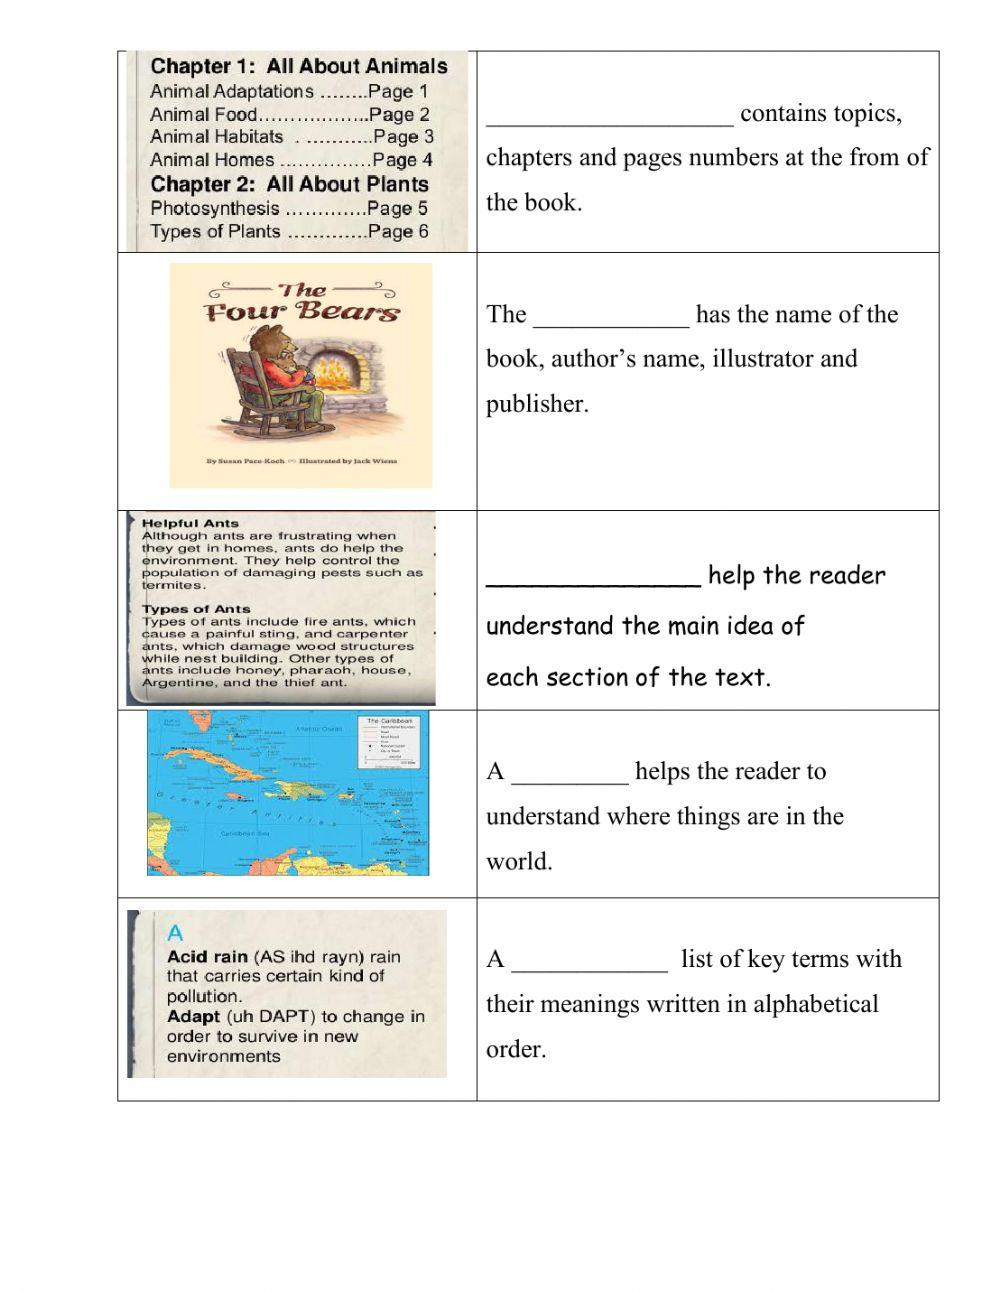 Text Features Worksheet